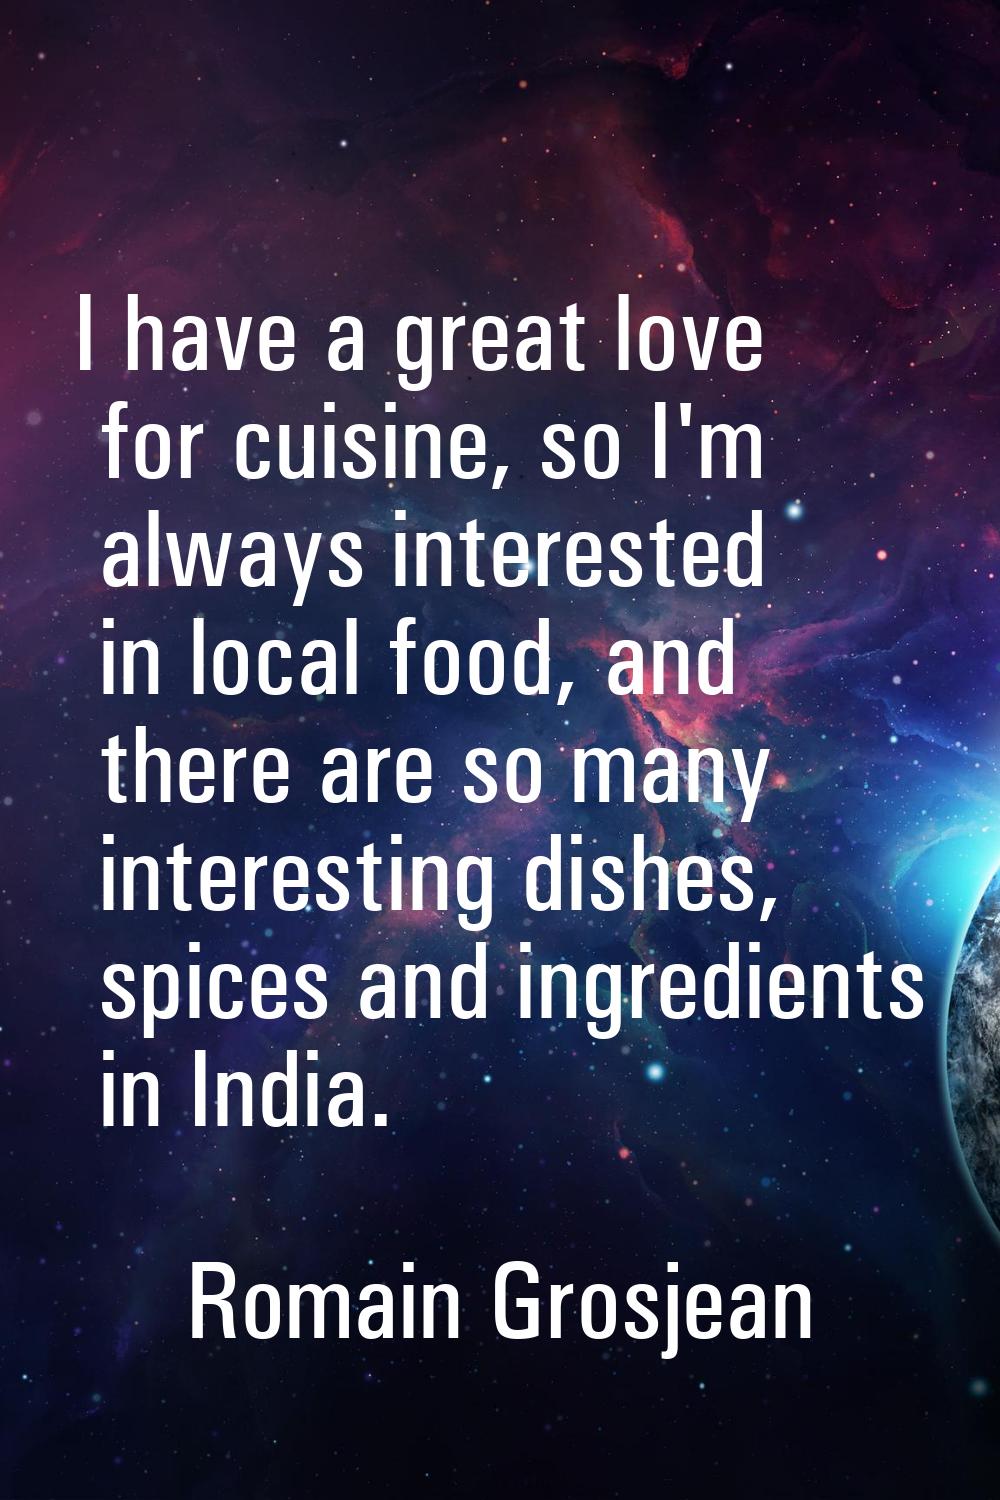 I have a great love for cuisine, so I'm always interested in local food, and there are so many inte